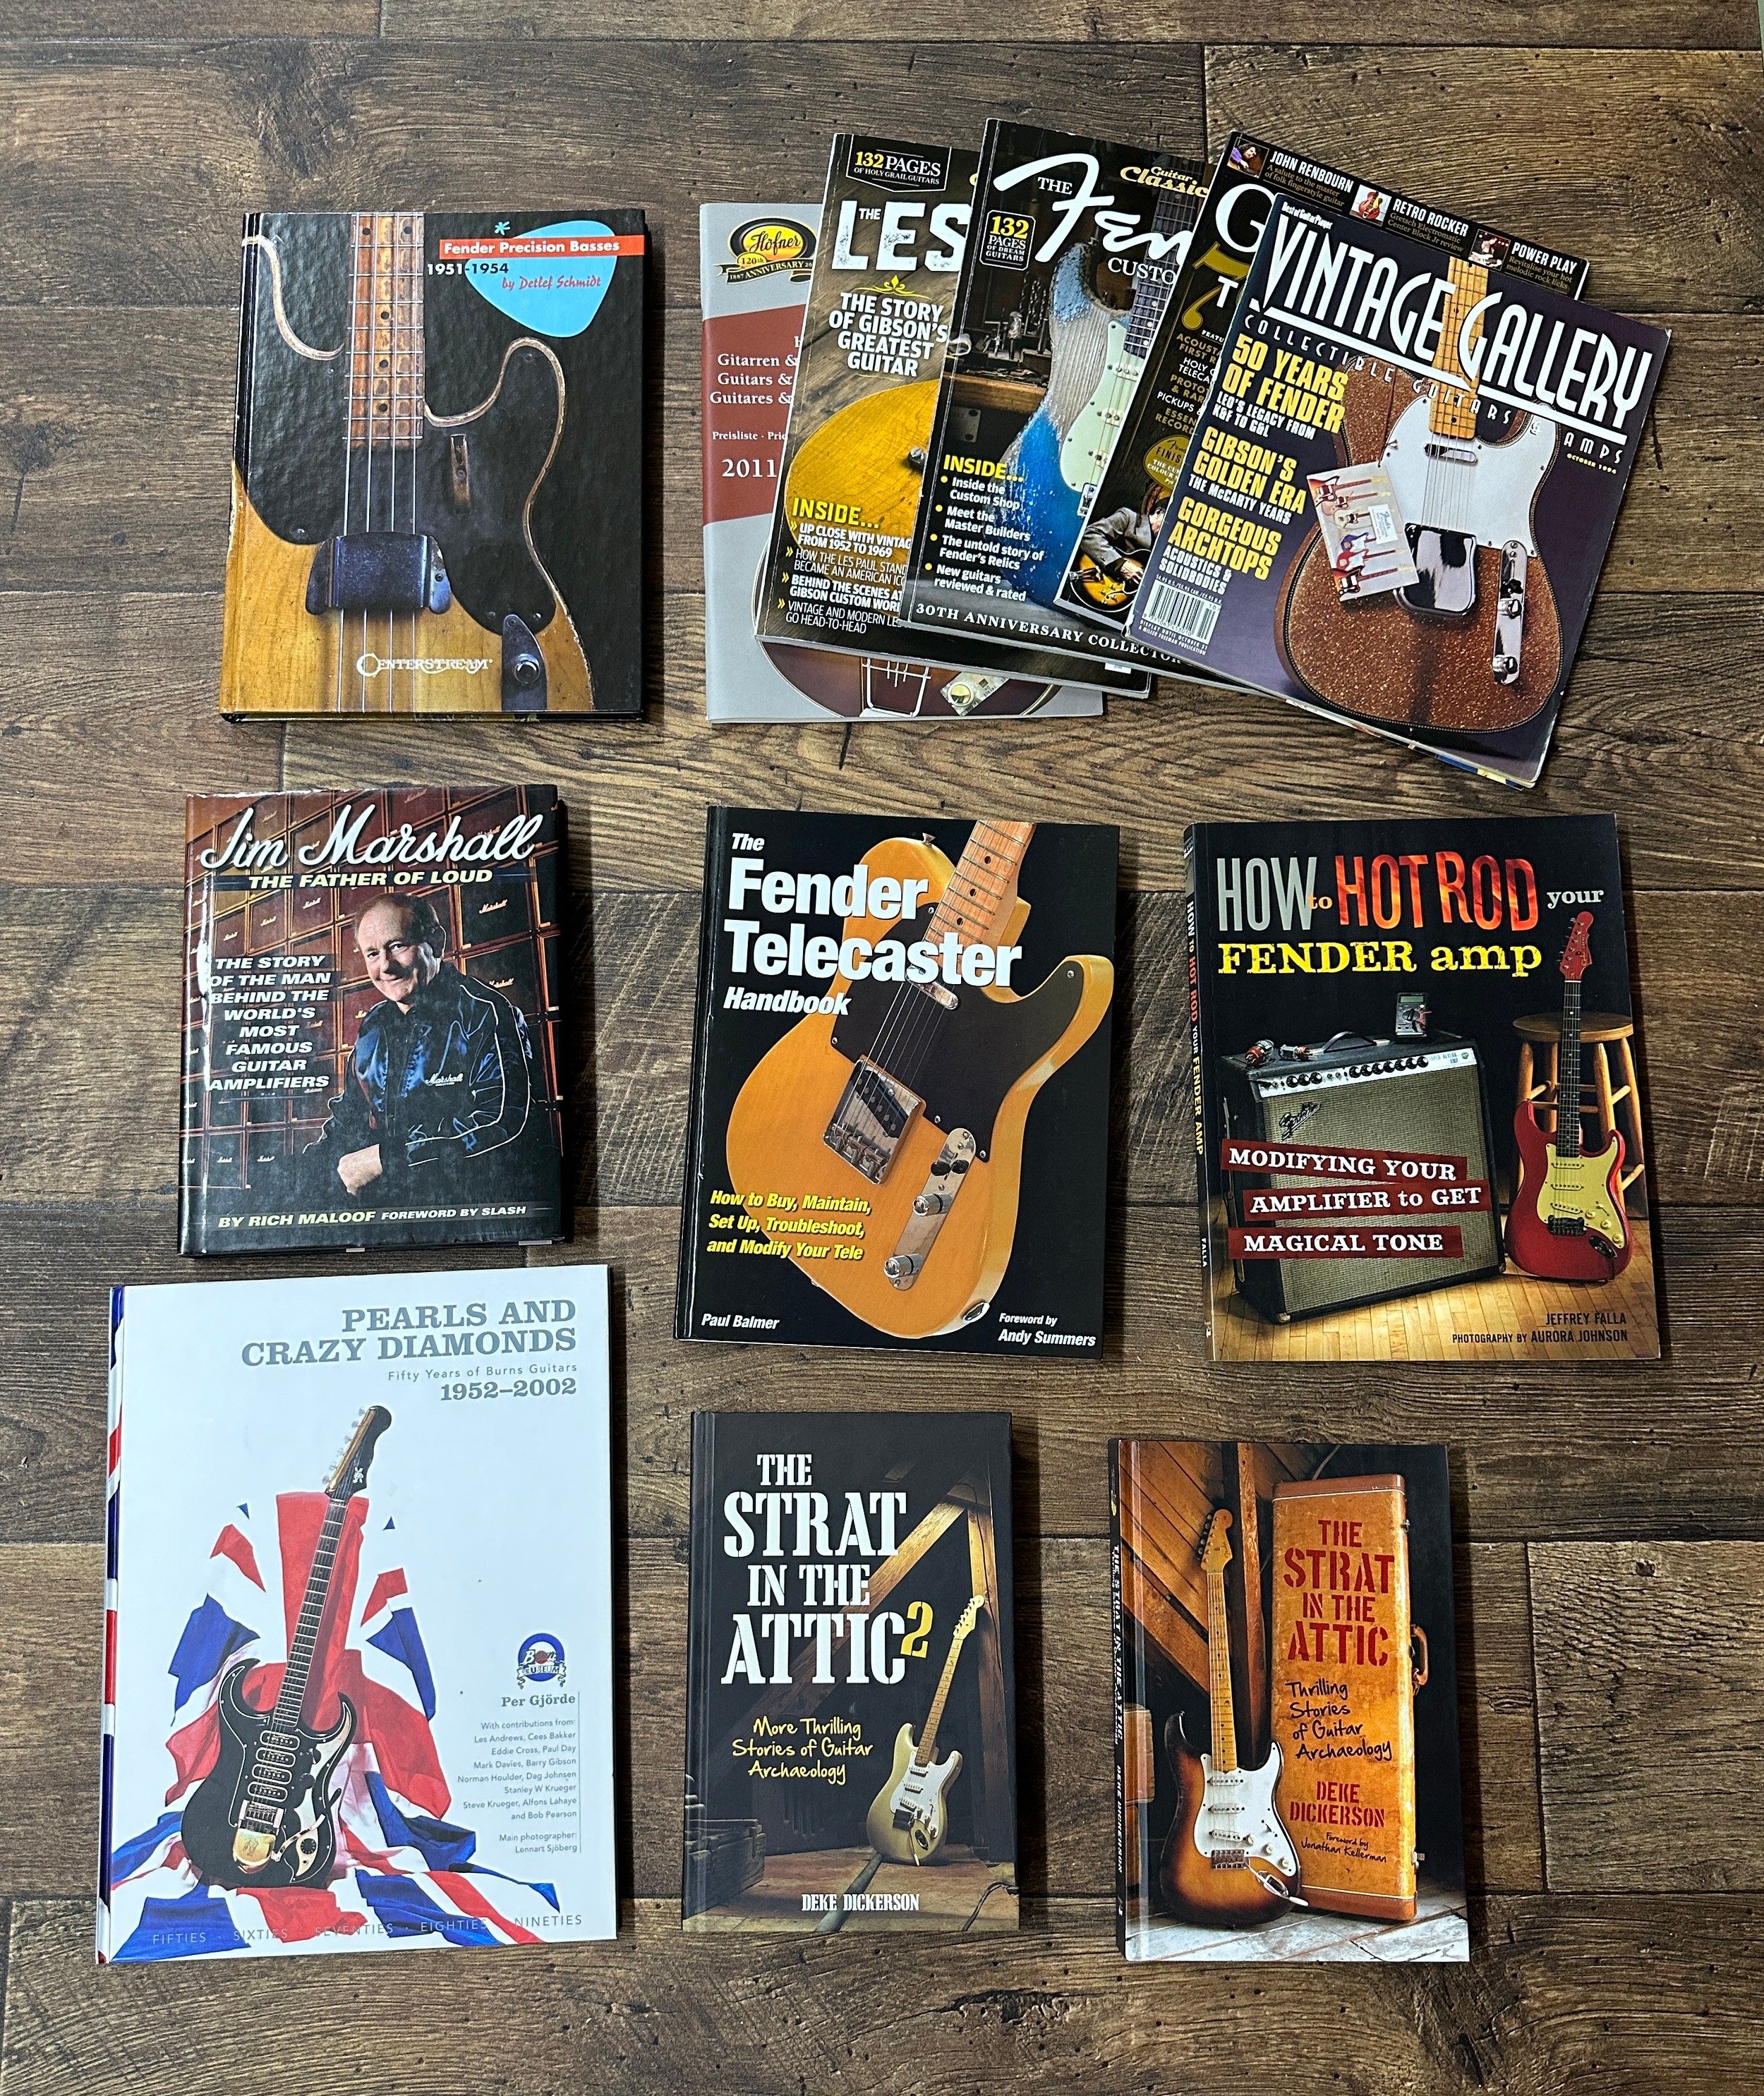 Good selection of guitar reference books to include Per Gjorde 'Pearls and Crazy Diamonds, the Fifty